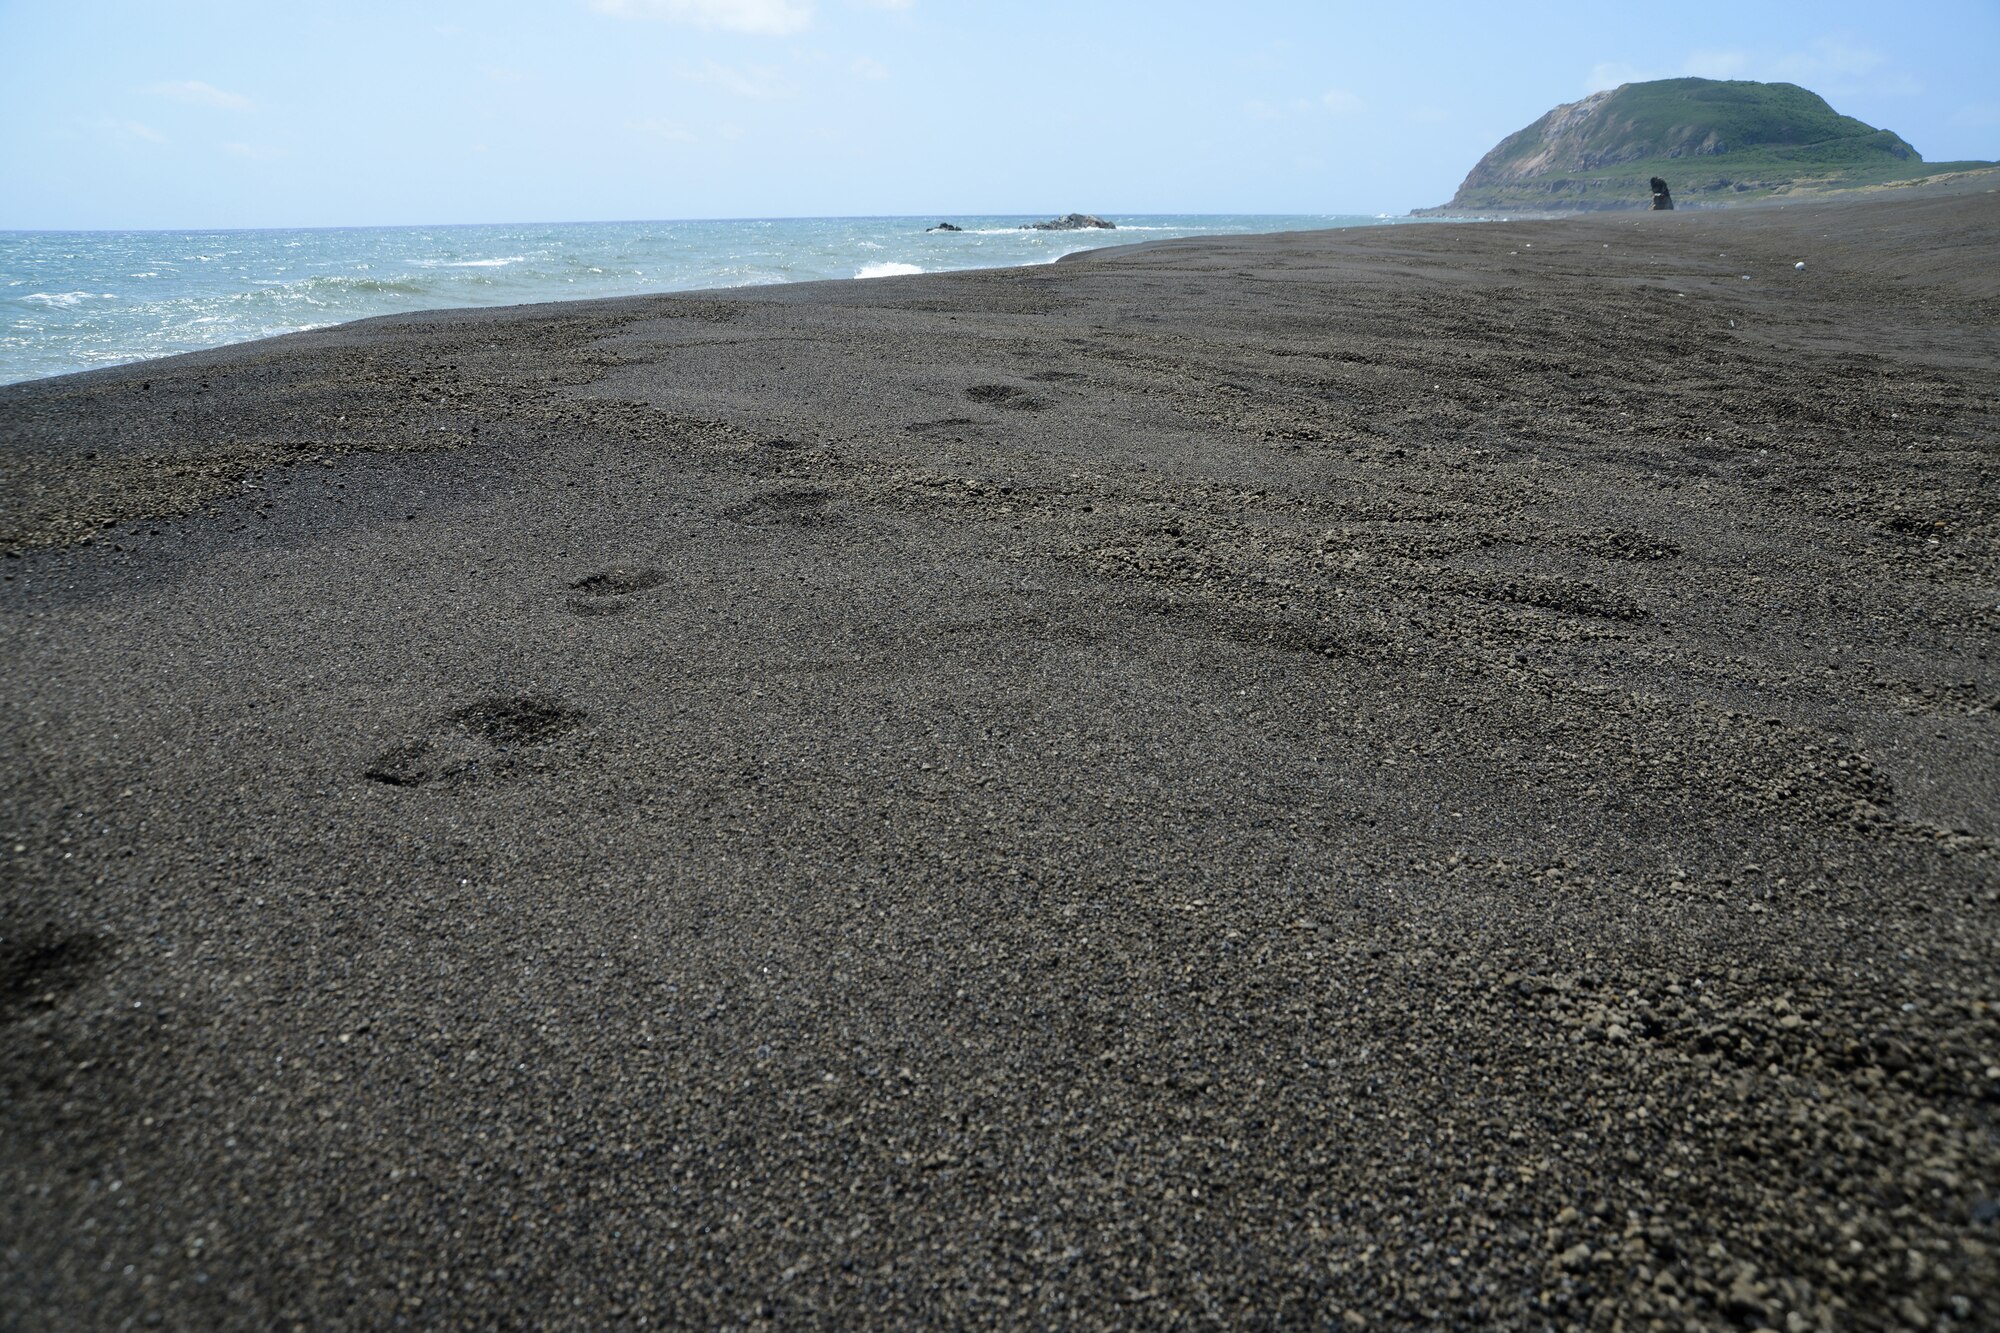 Fresh boot prints line the beach headed toward Mount Suribachi on Iwo To, Japan, formerly known as Iwo Jima. Members of the 18th Medical Group hosted a professional development trip to the island for about 40 of its Airmen on March 18, 2013. (U.S. Air Force photo/Tech Sgt. Jocelyn L. Rich-Pendracki)